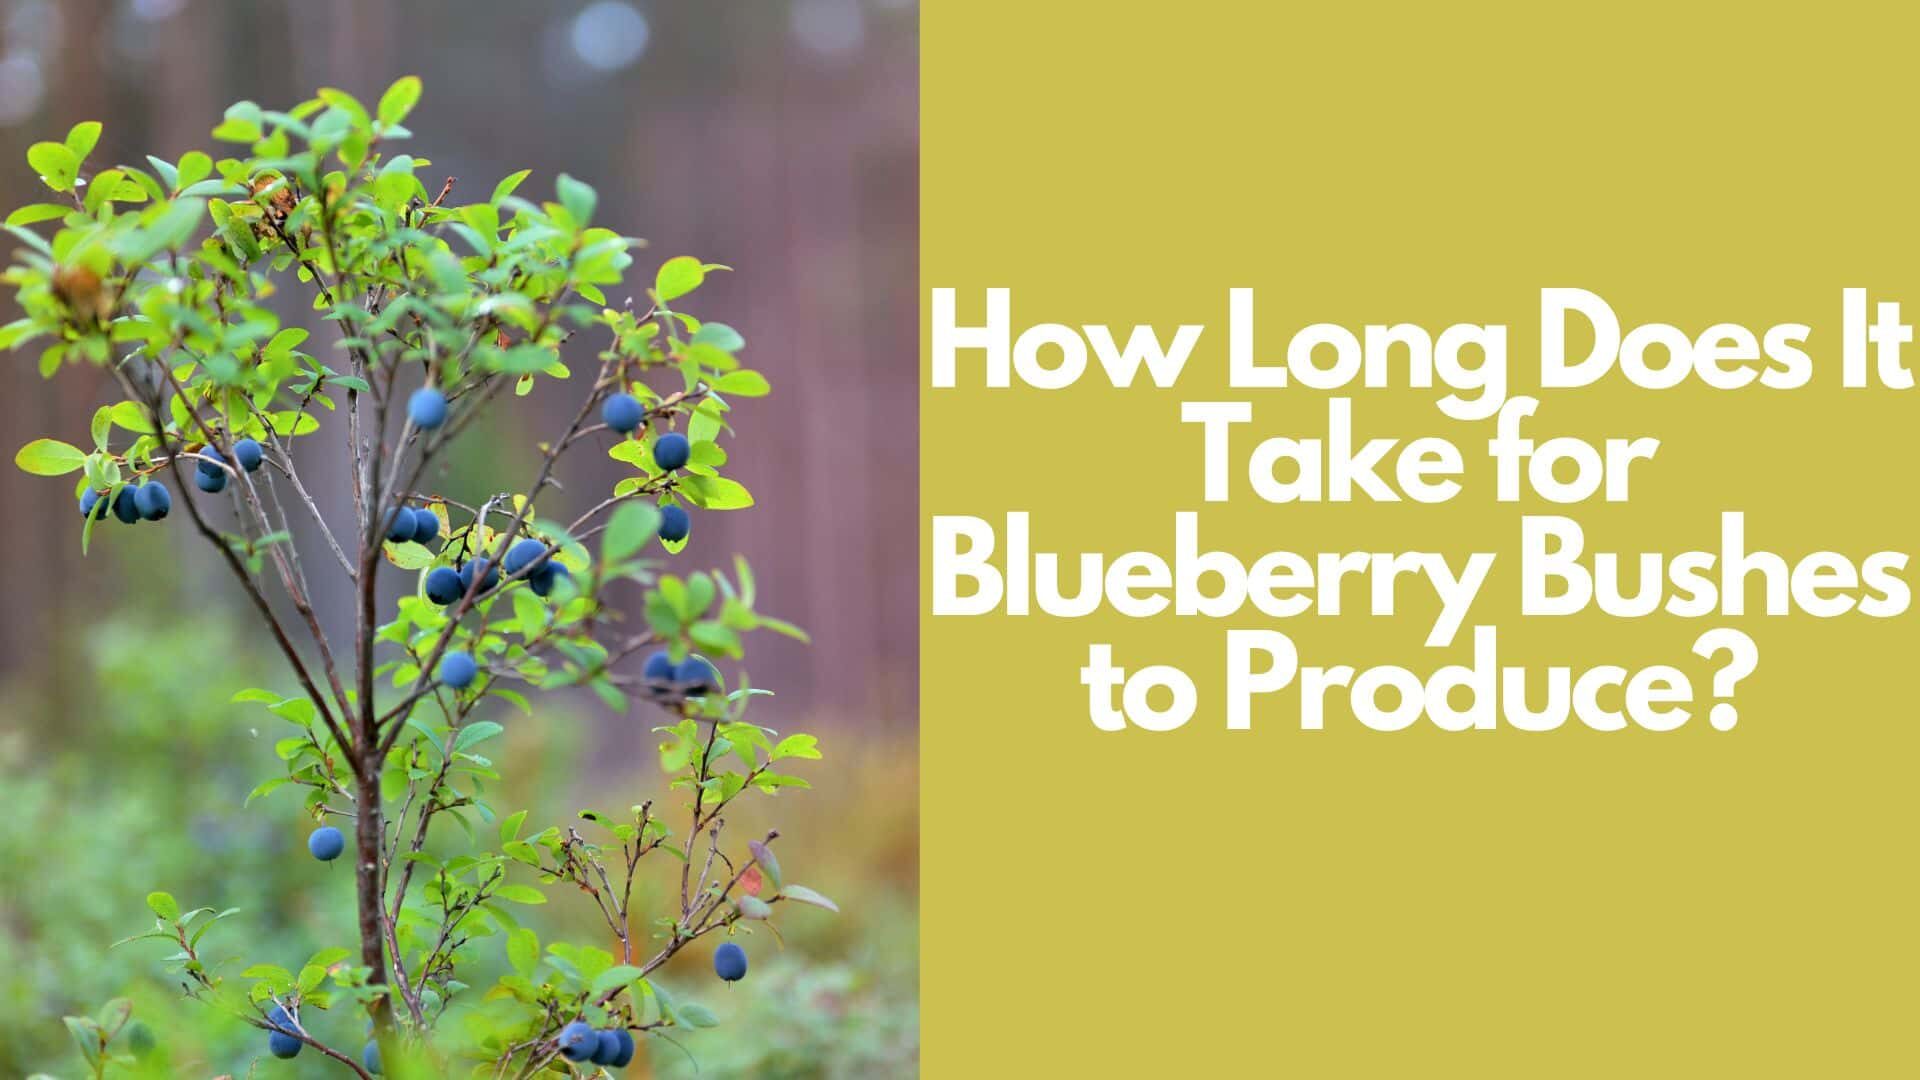 How Long Does It Take for Blueberry Bushes to Produce? 